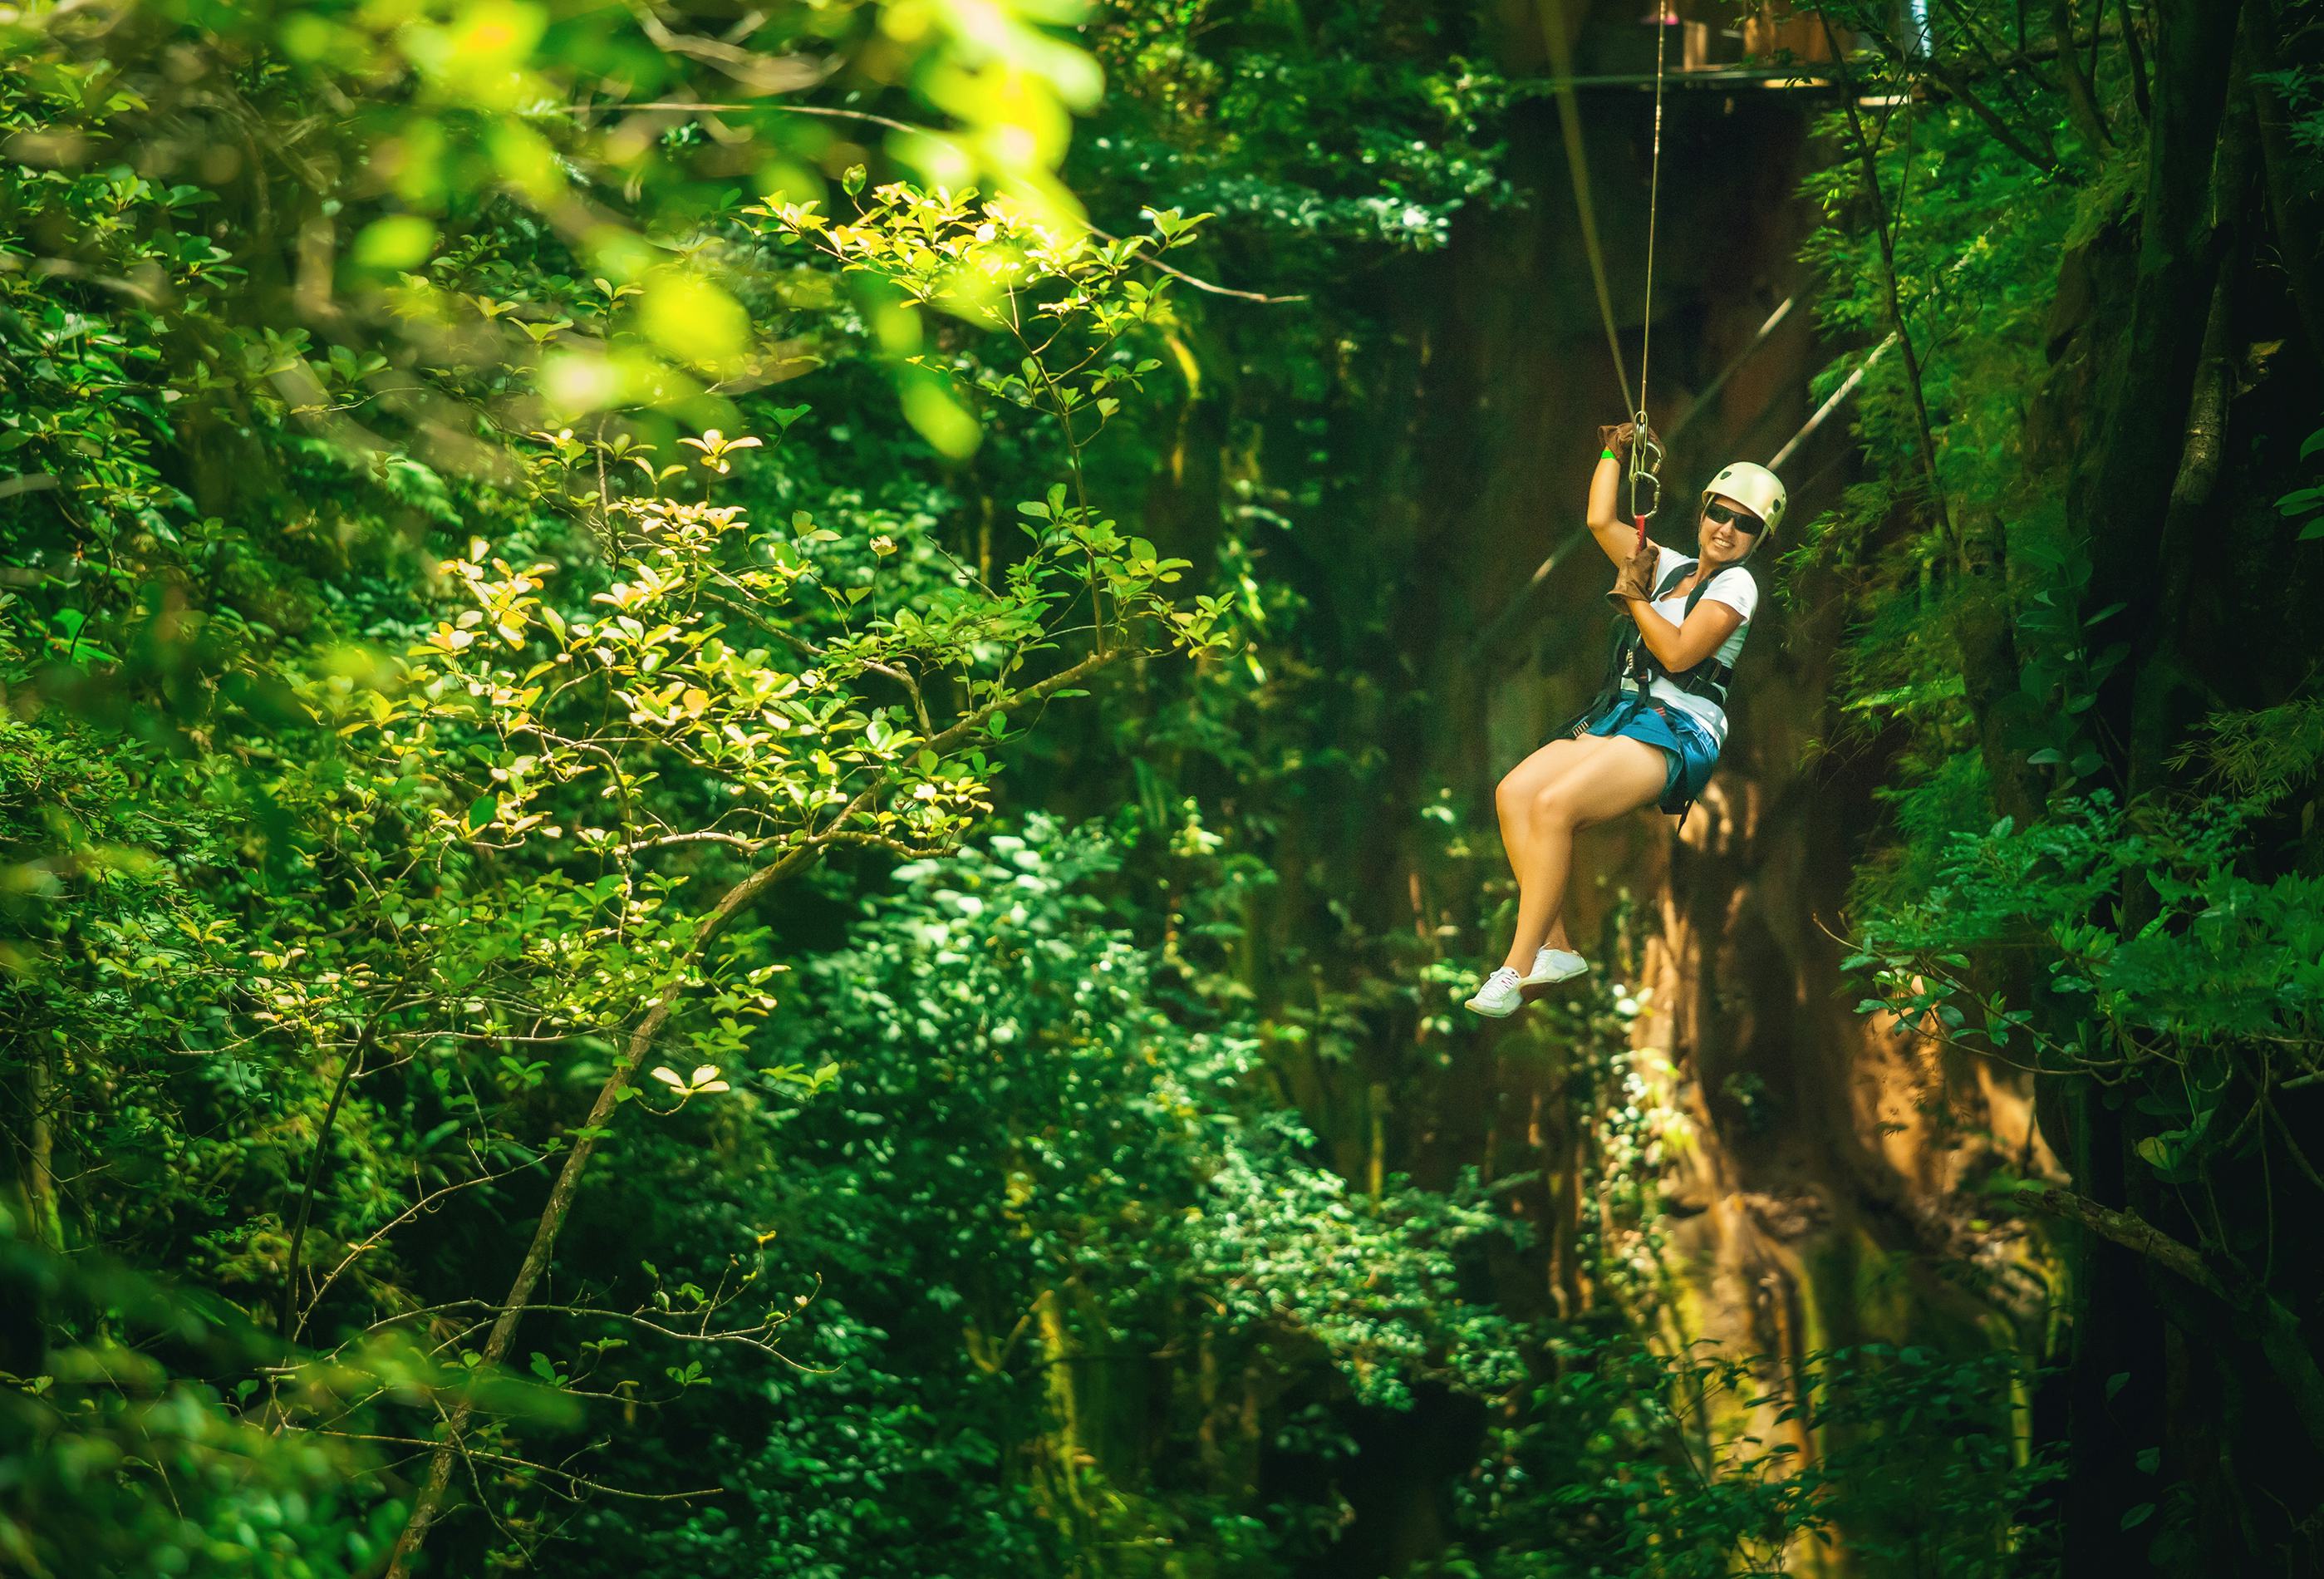 Woman during a Canopy Tour in Costa Rica, ziplining through the rainforest 